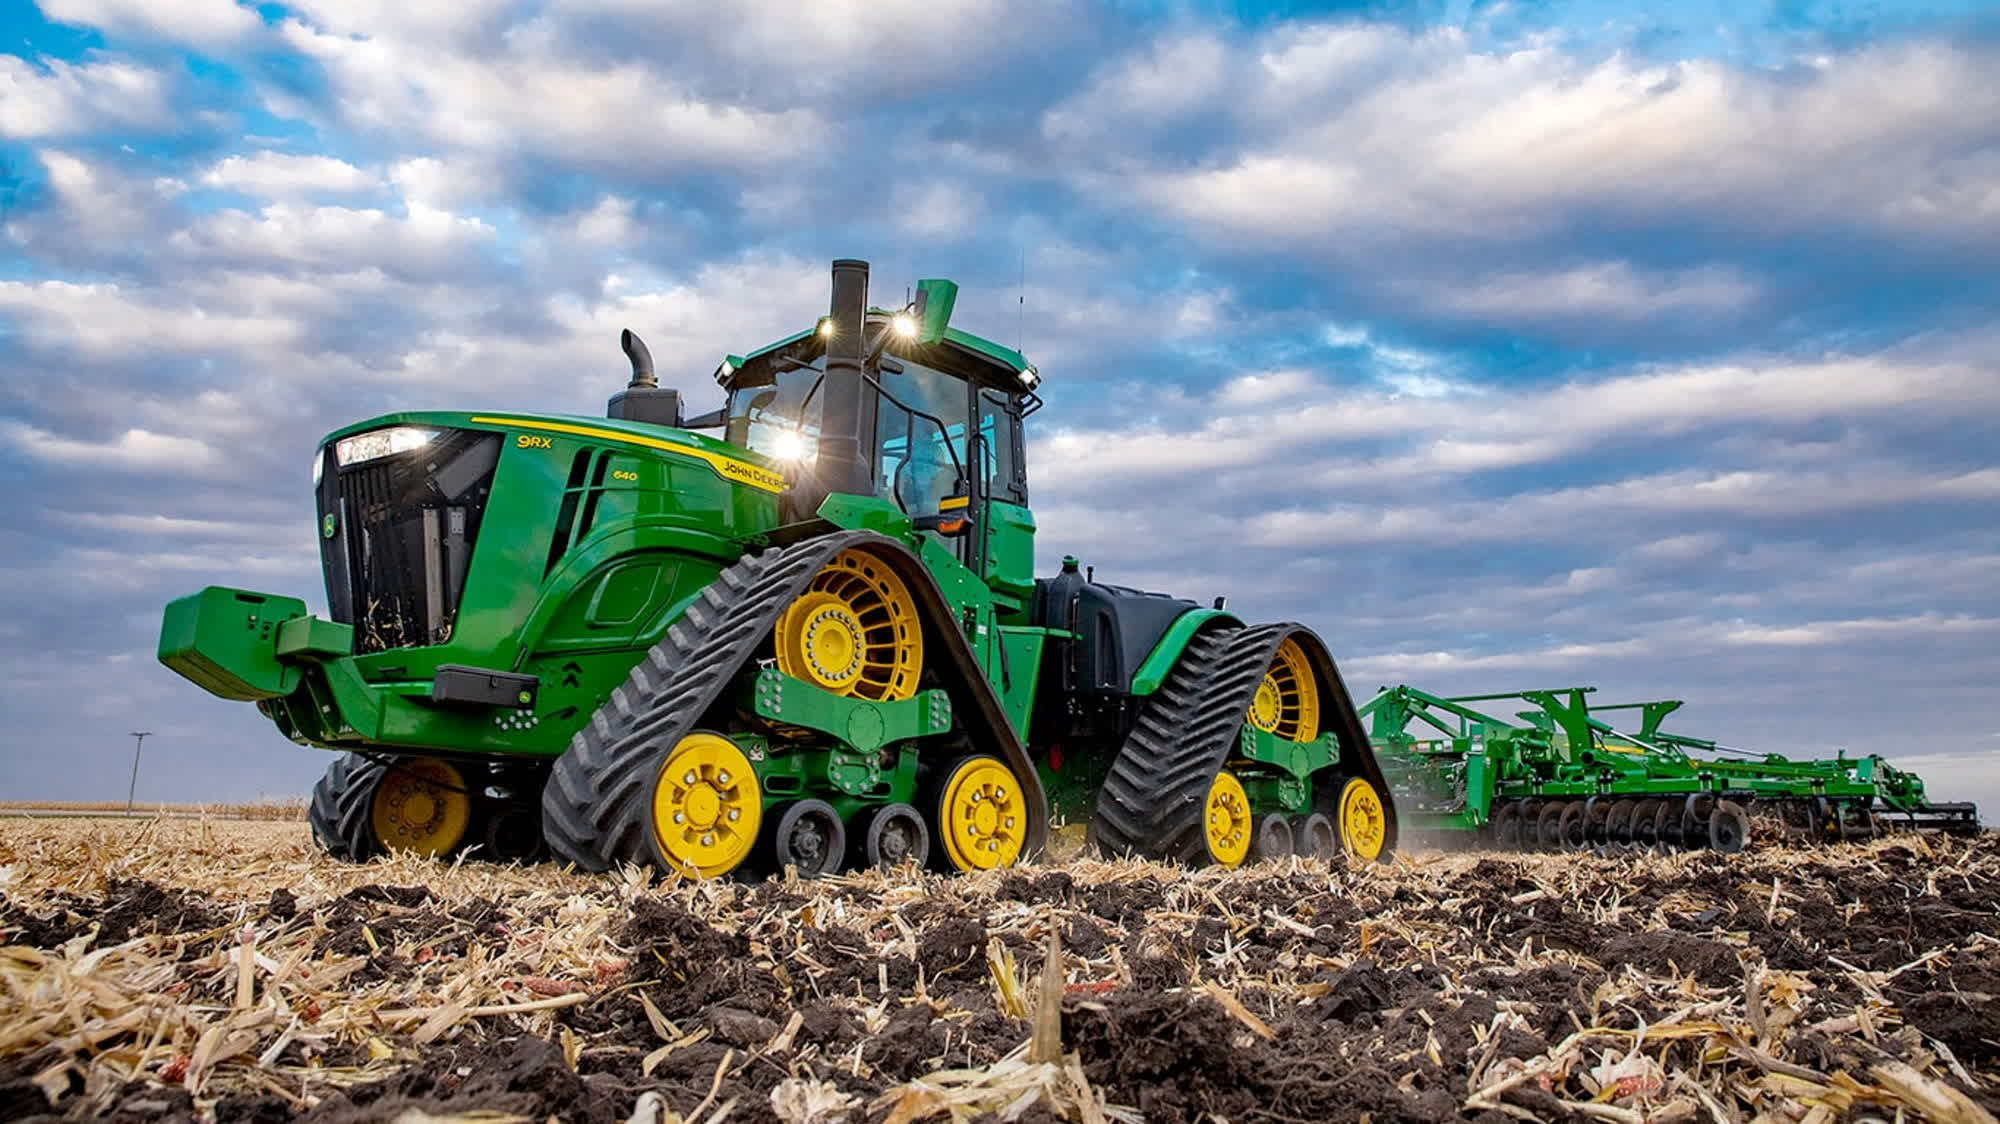 John Deere scolded for its inability to comply with GPL software license